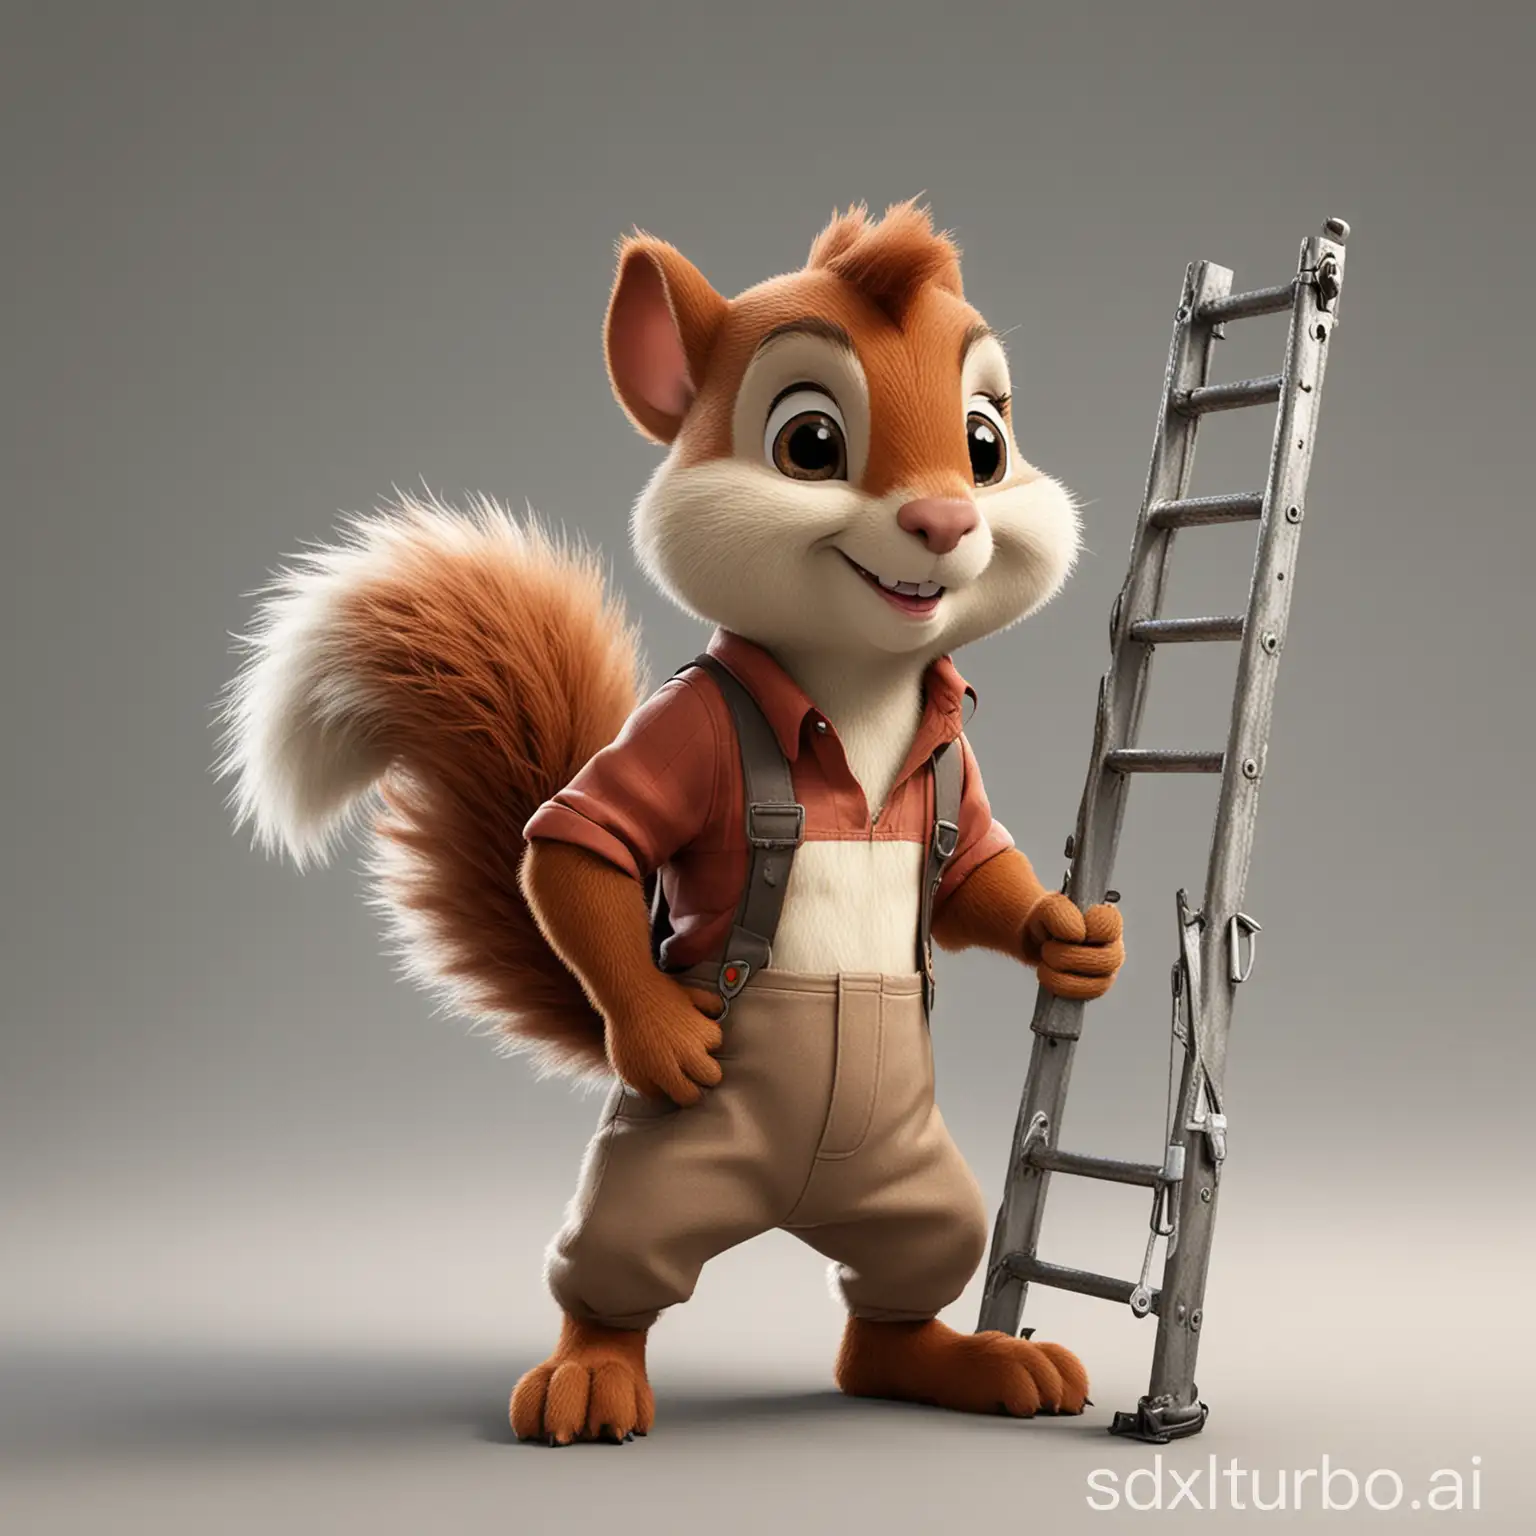 create for me a mascot based on a squirrel that carries scaffoldings, tools or ladders (at choice). it should resemble the characters of Chip 'n' Dale from Disney but with clothes